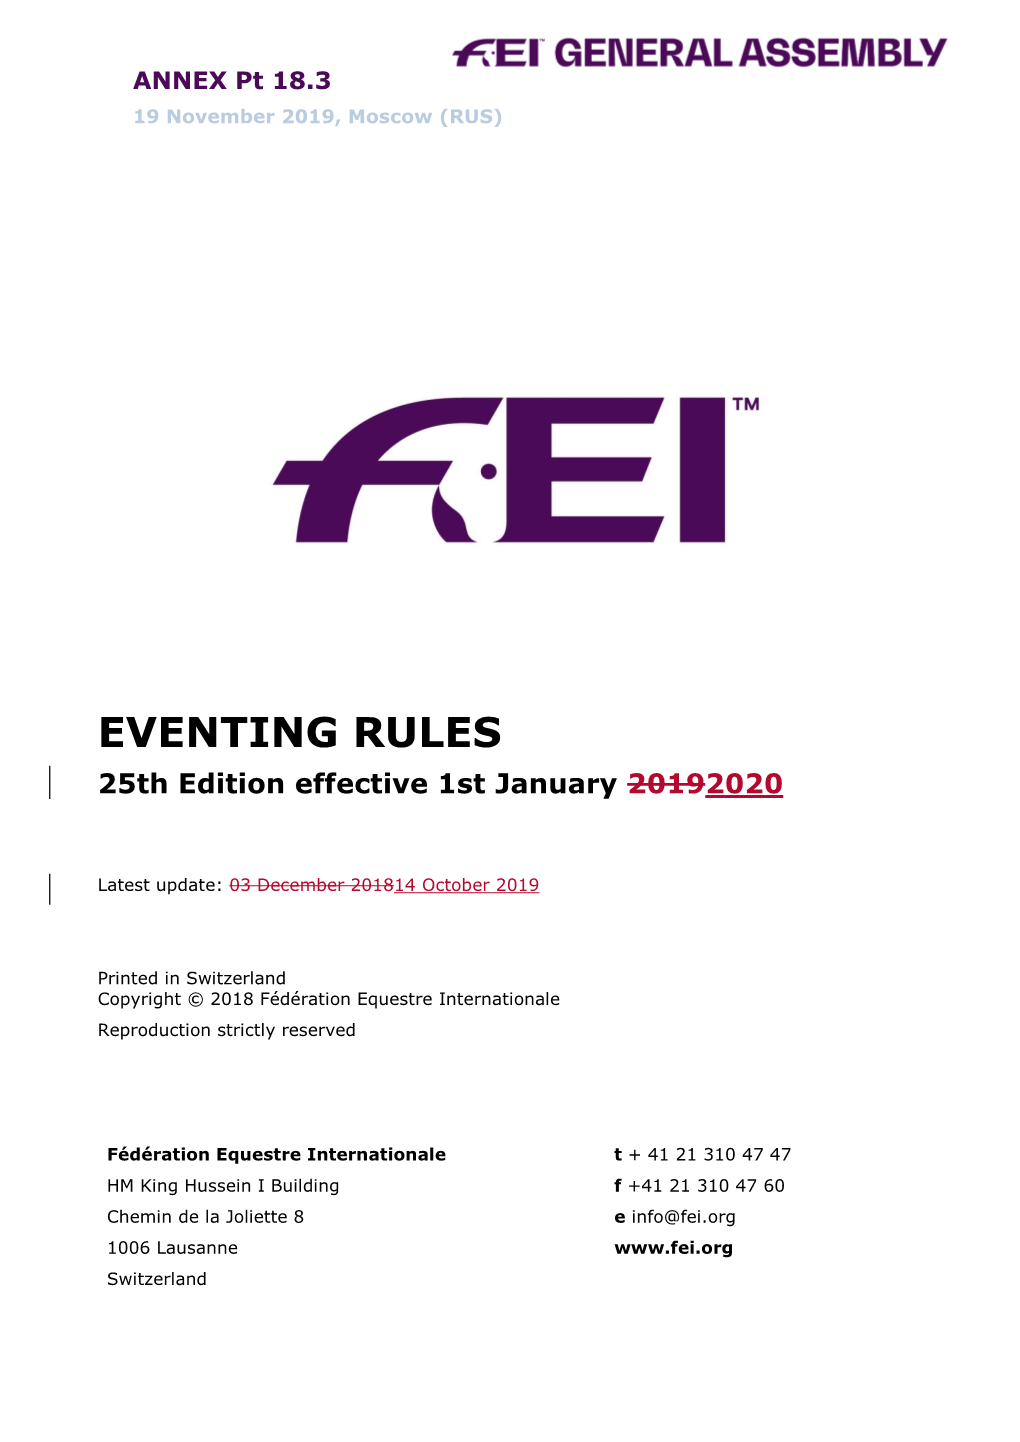 EVENTING RULES 25Th Edition Effective 1St January 20192020